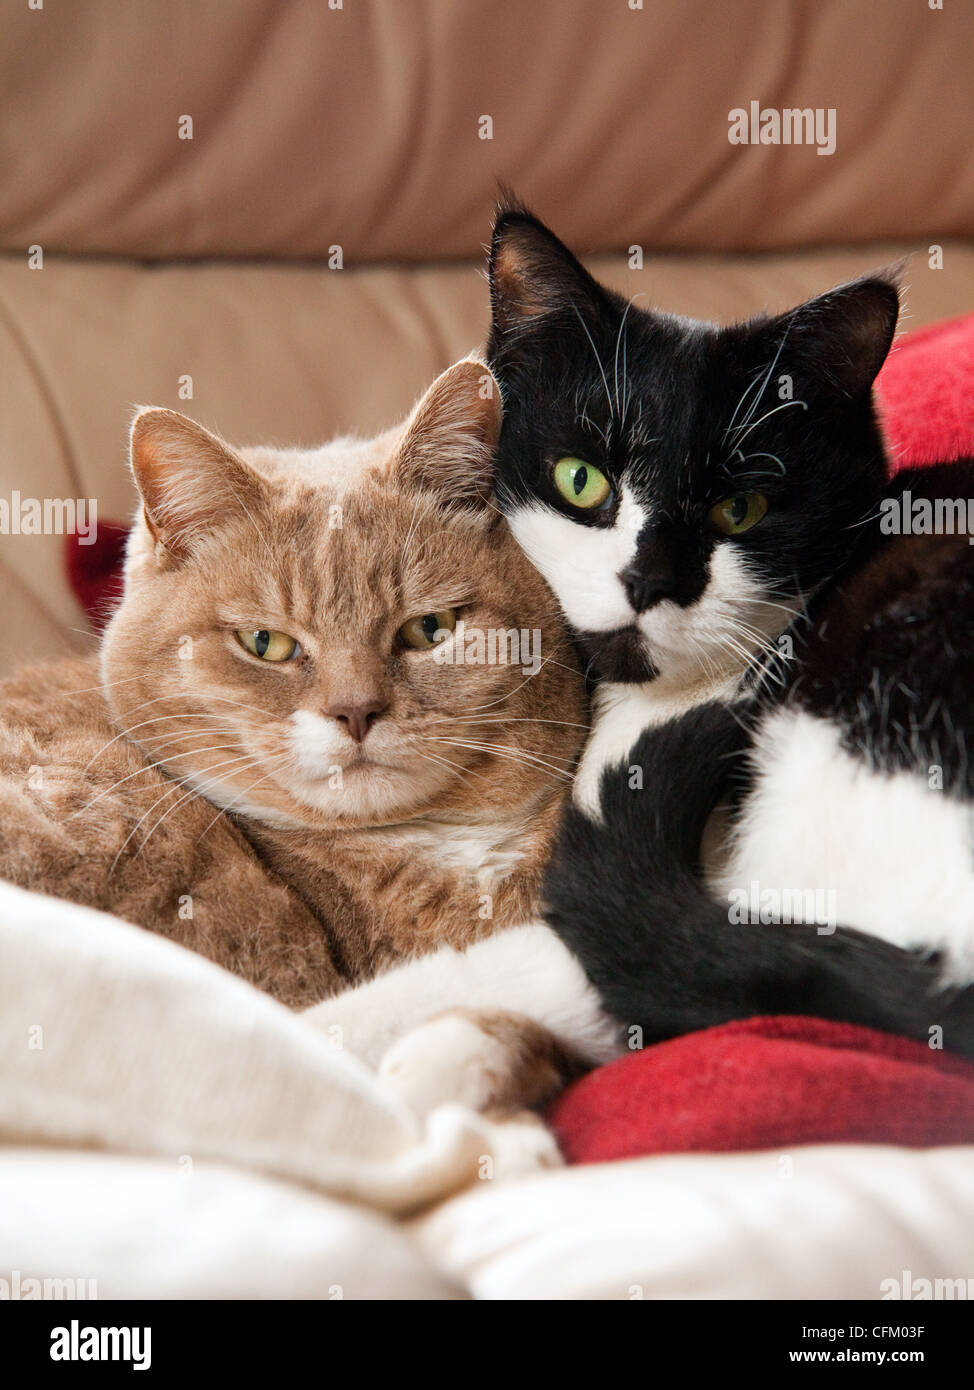 A pair of short-haired domestic cats cuddling together indoors, UK Stock Photo